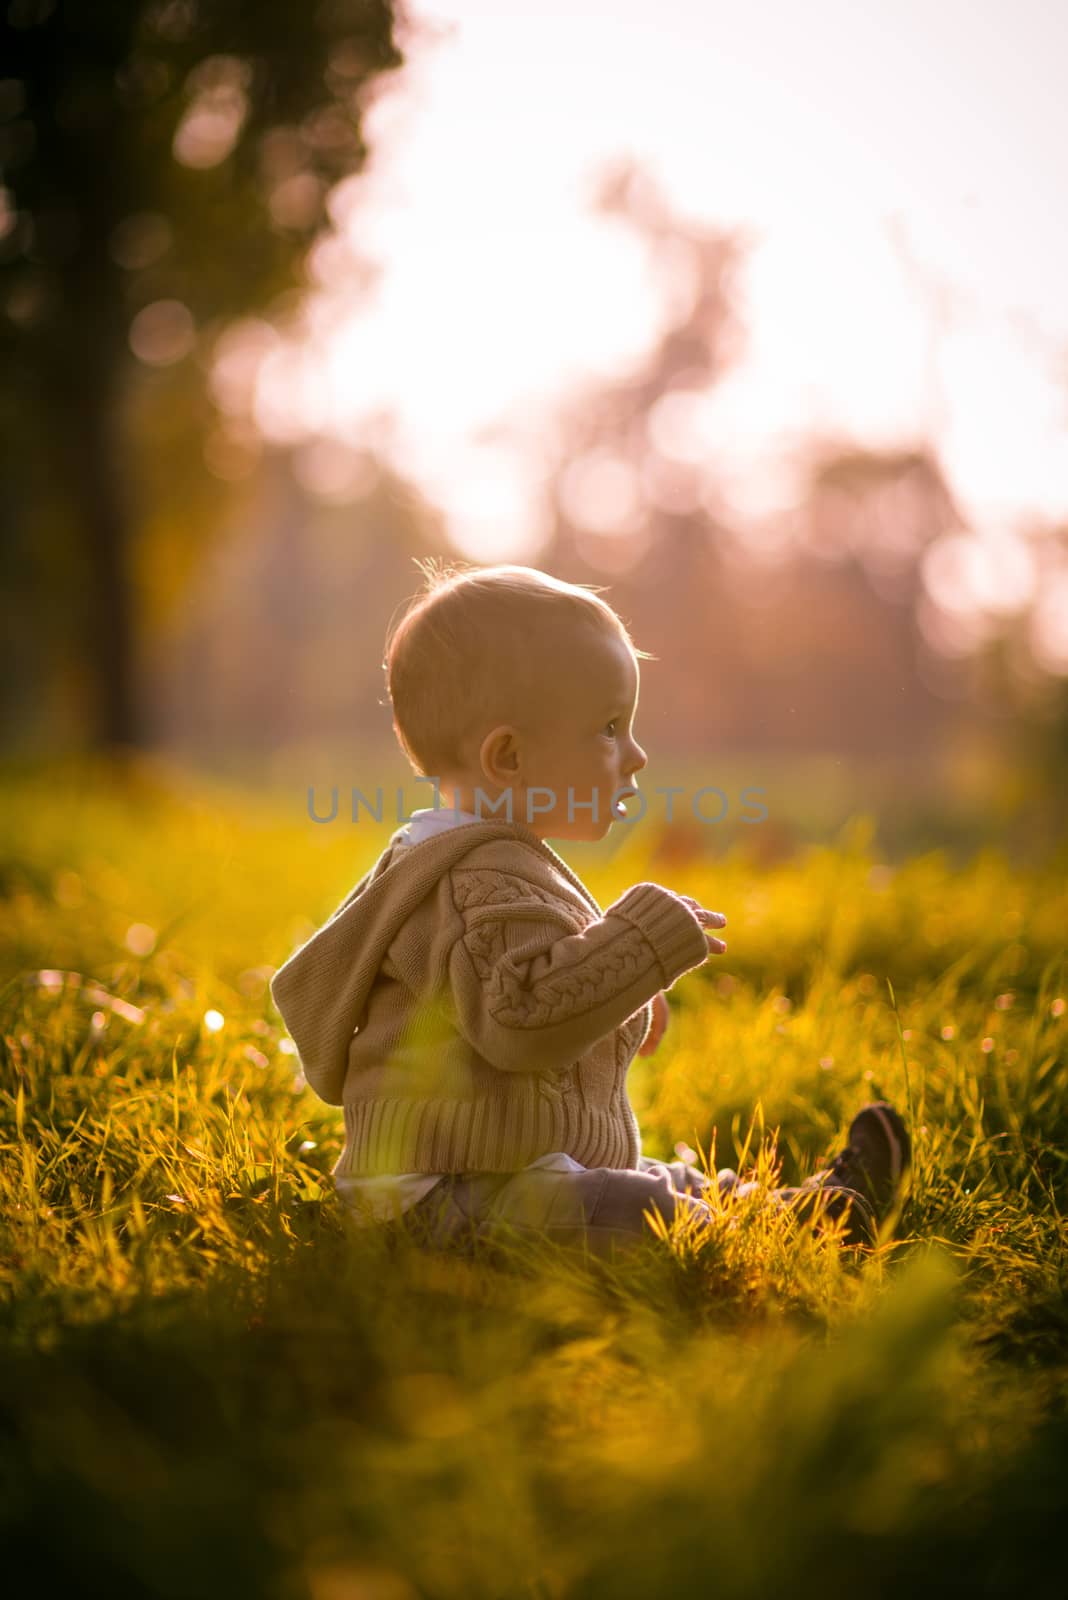 Toddler sitting on the grass in the park, shoot against the sun